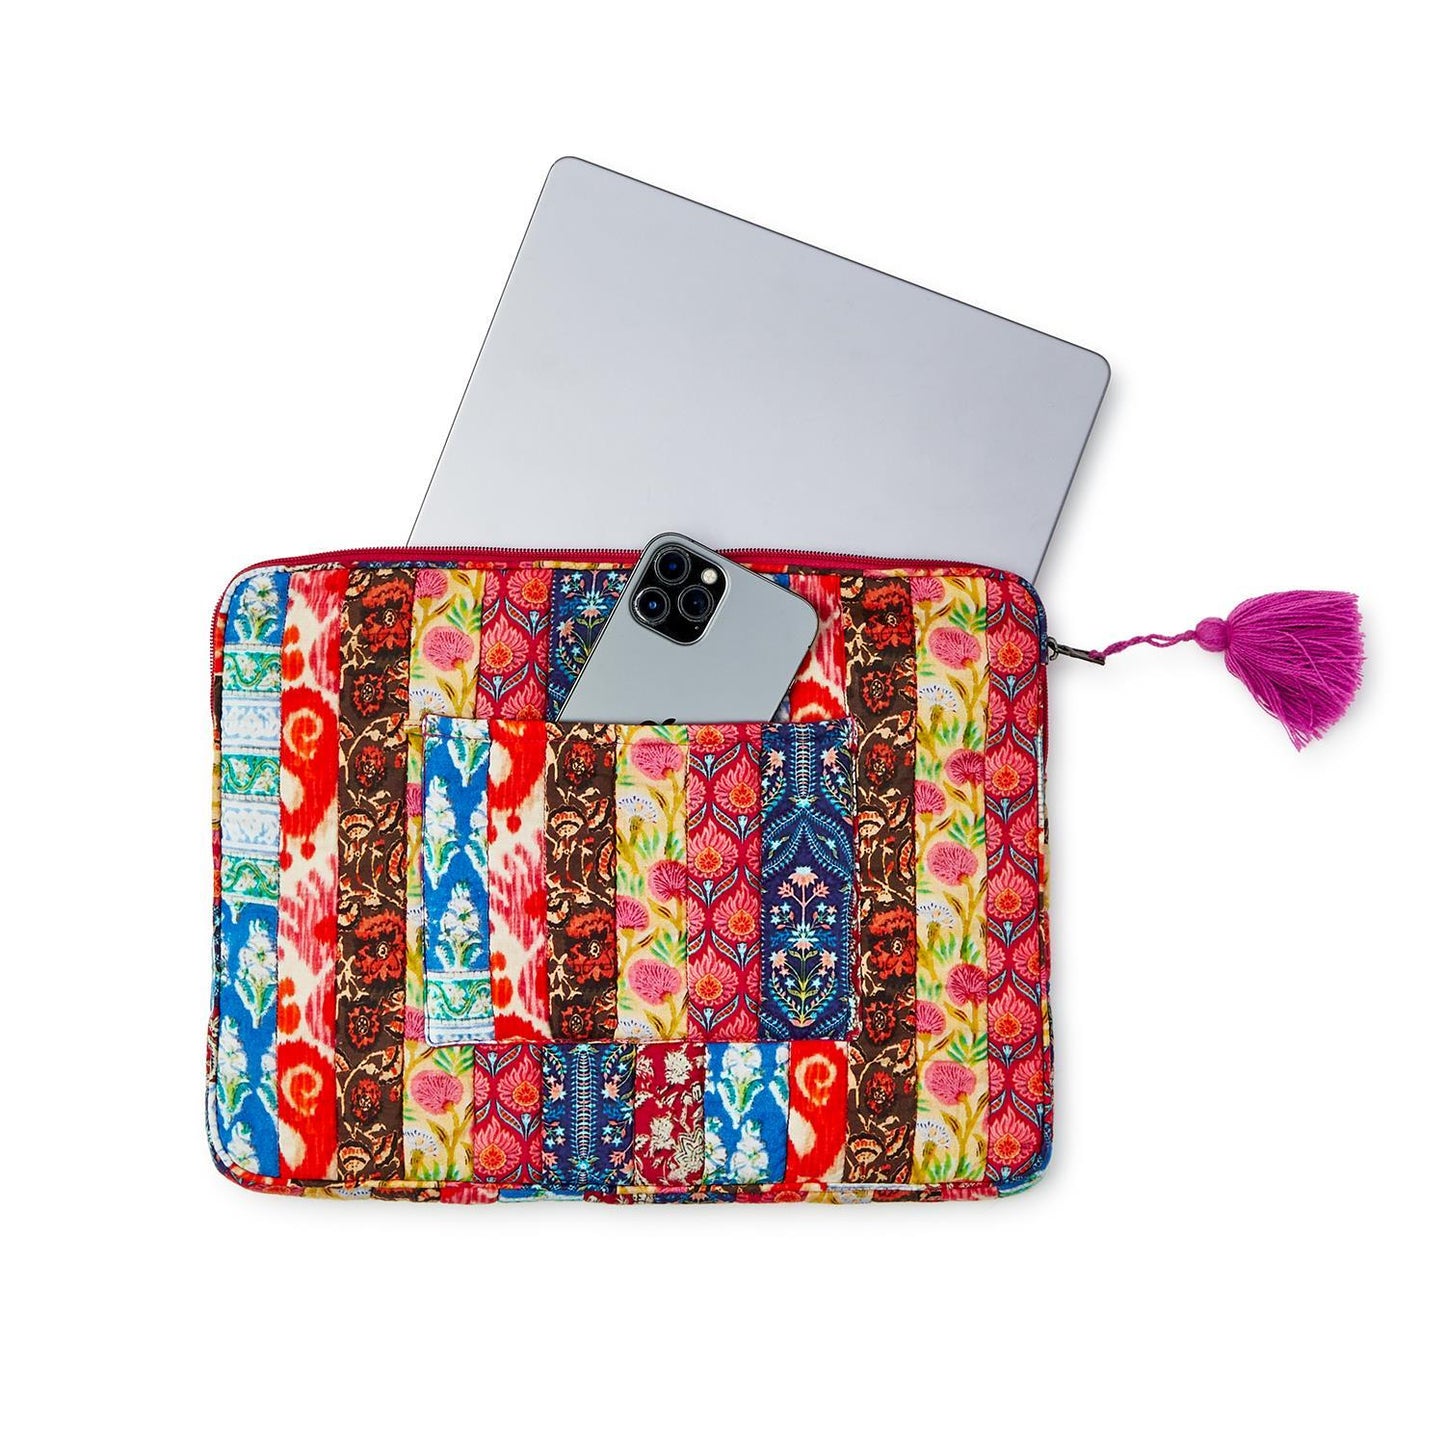 Stow Away Laptop Pouch in Printed Fabric - Cotton